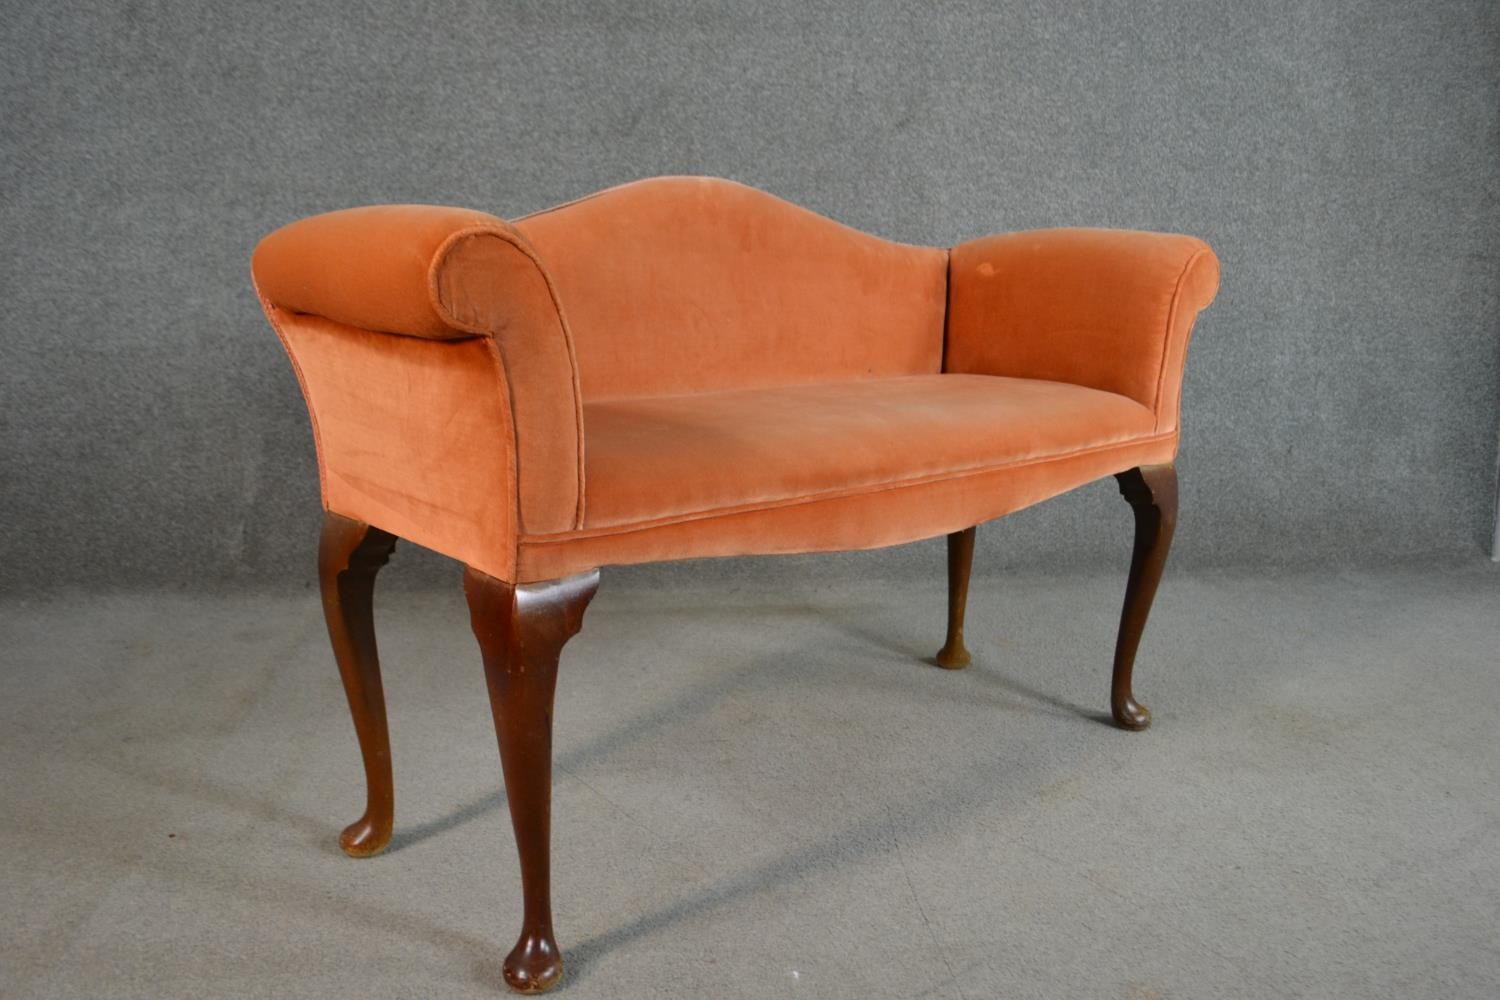 A George III style mahogany hump back window seat, upholstered in salmon coloured velour, on - Image 5 of 5